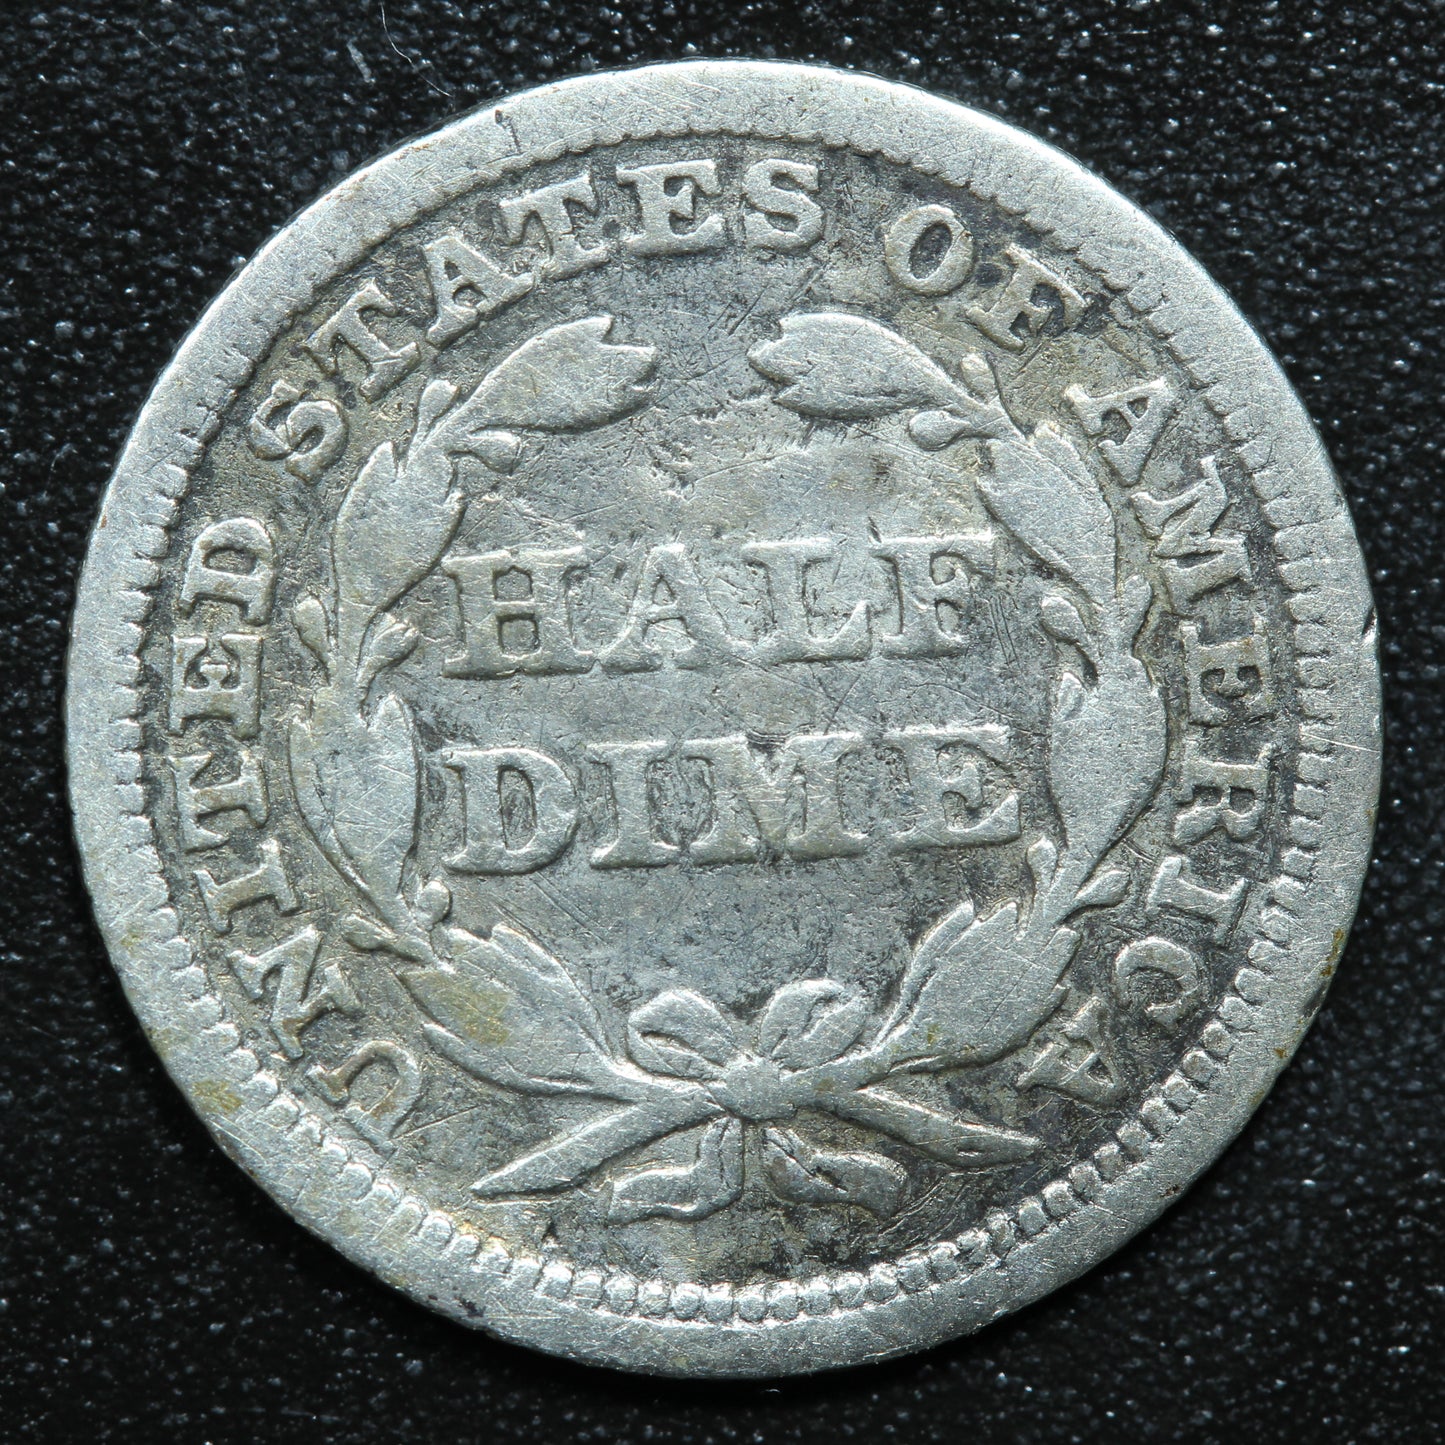 1853 Half Dime 5c Liberty Seated Arrows at Date